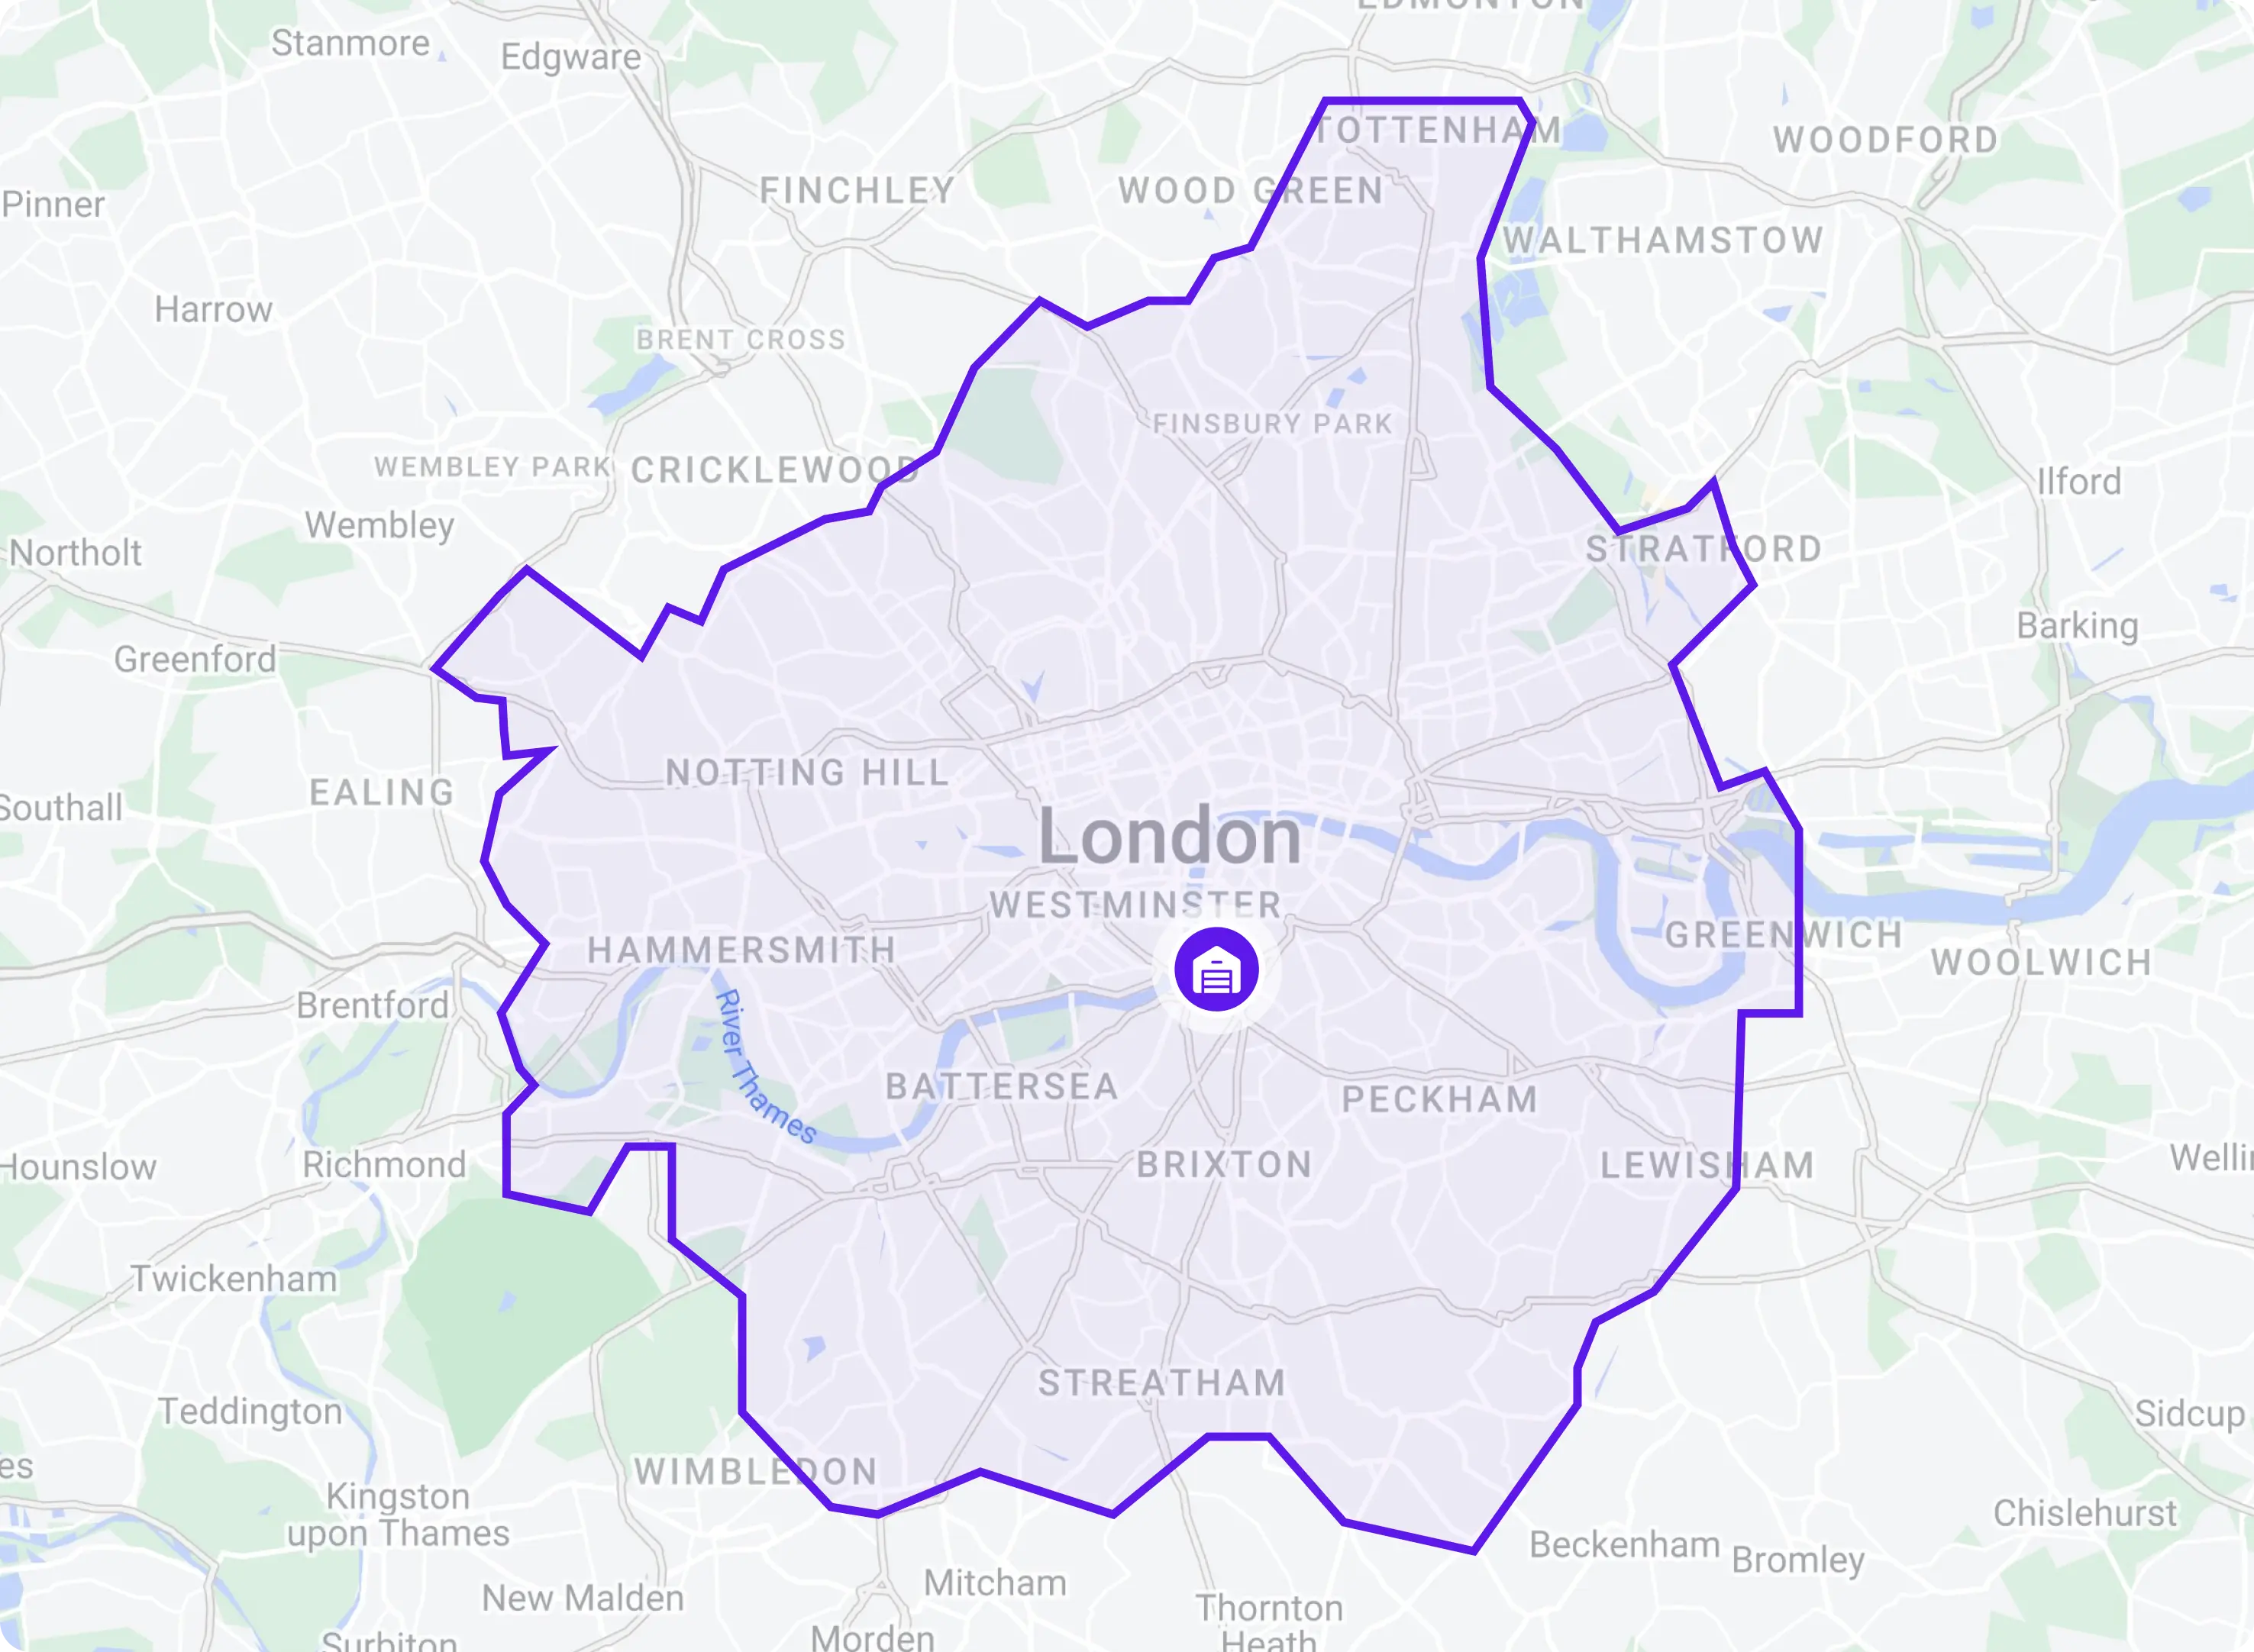 Quiver's 7-mile operating area around Vauxhall in London